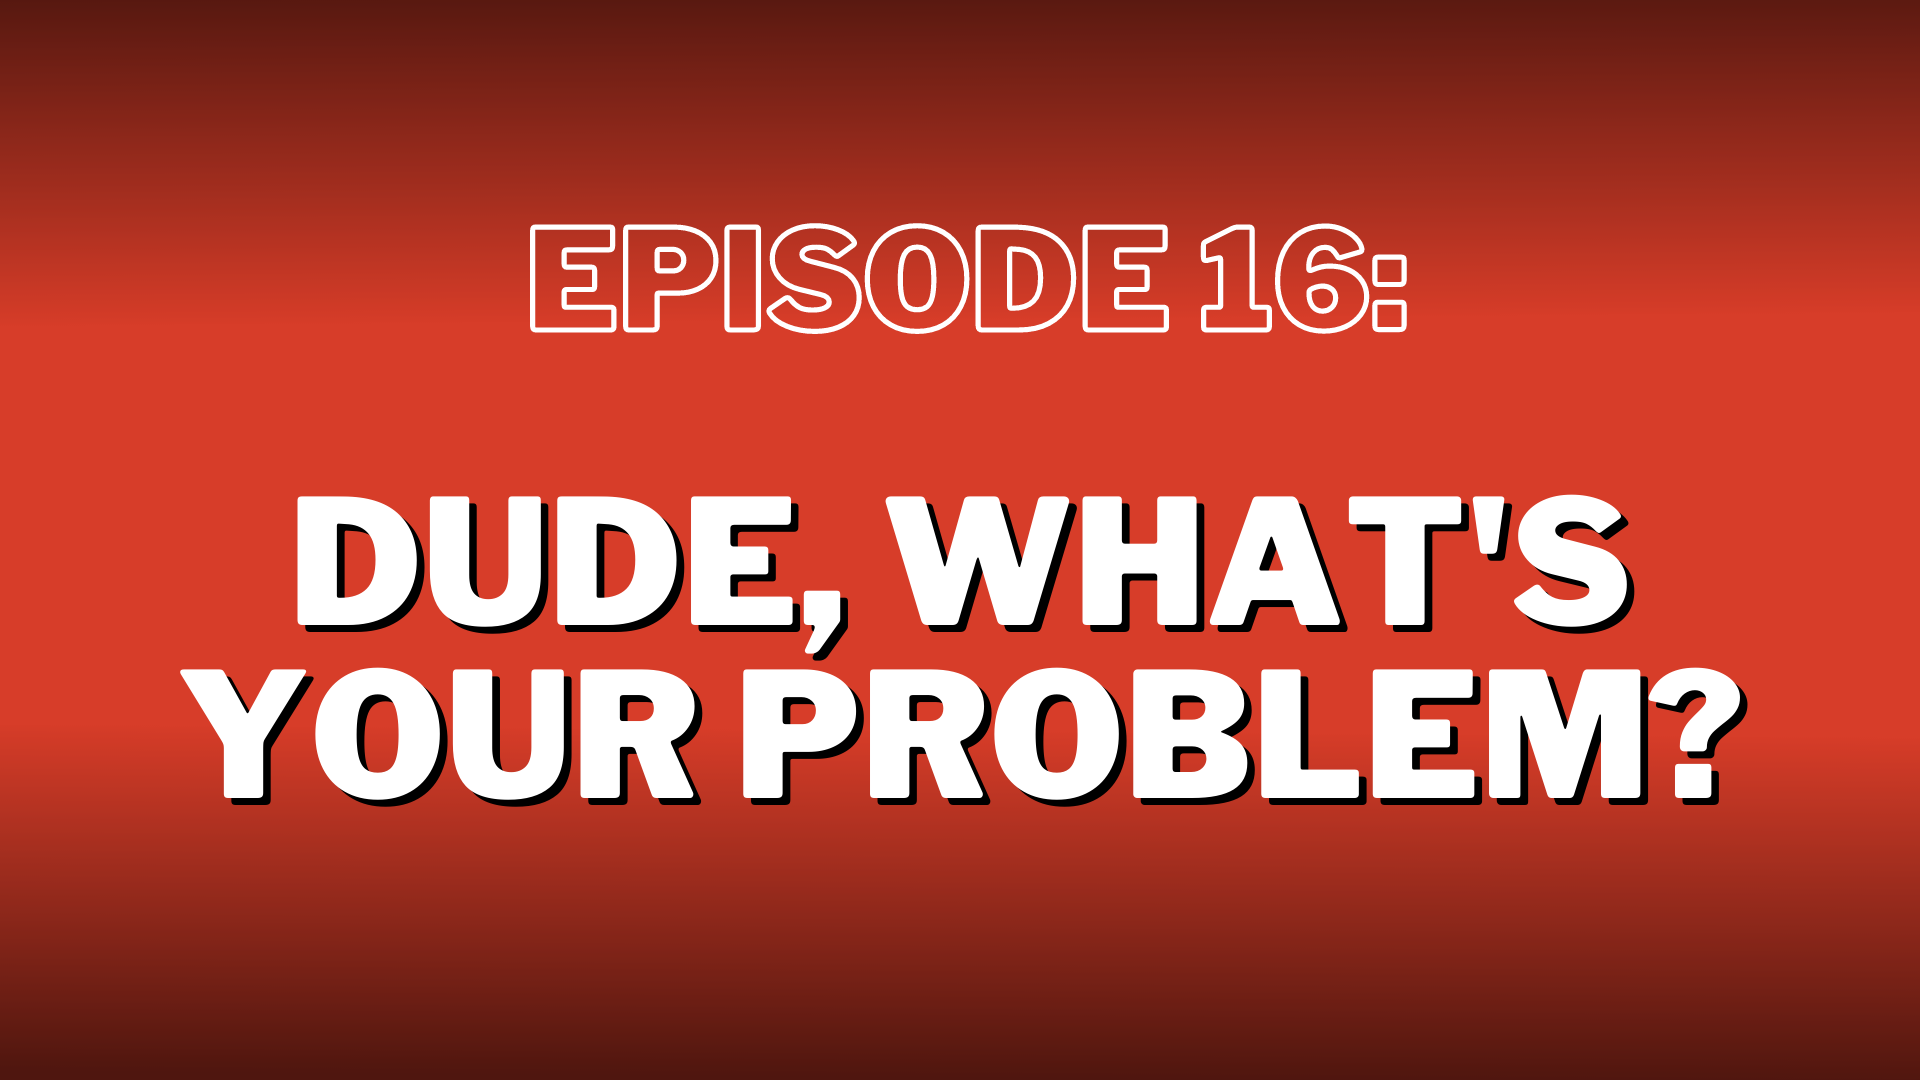 S3. Episode 16: Dude, What’s Your Problem? – Show Notes